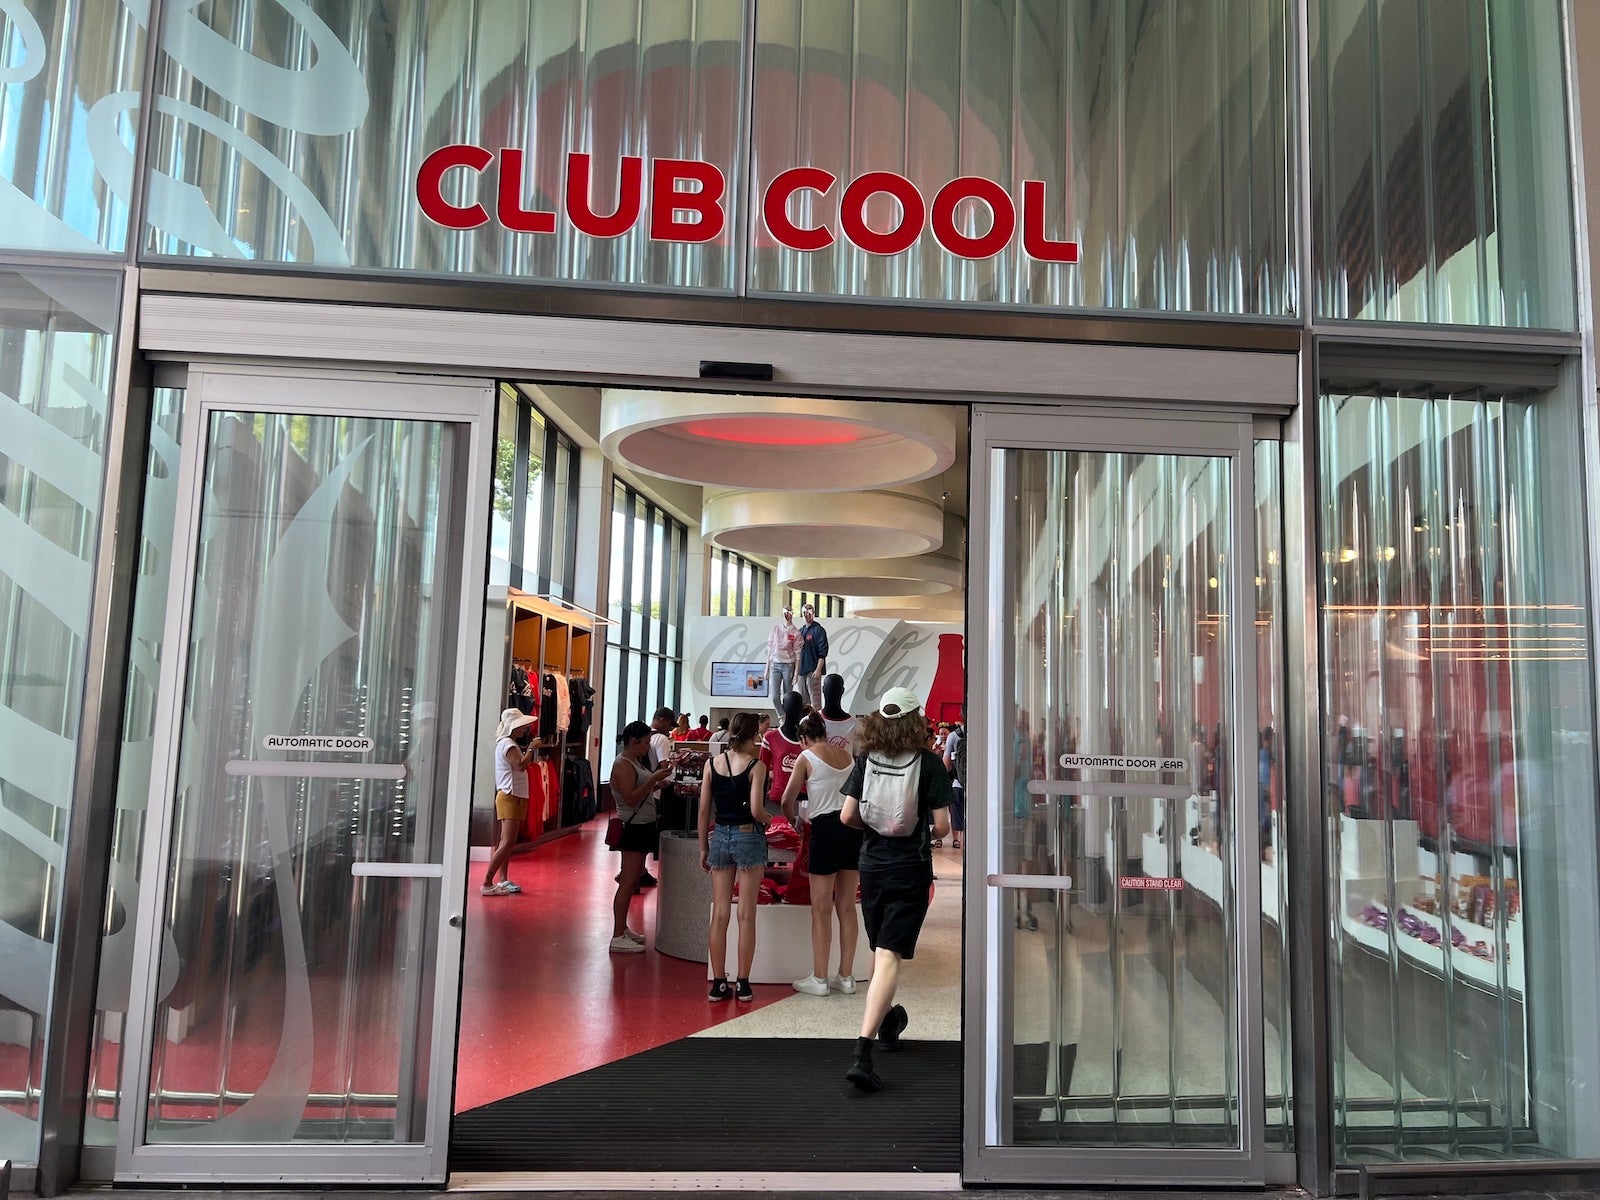 Entrance to Club Cool at Epcot